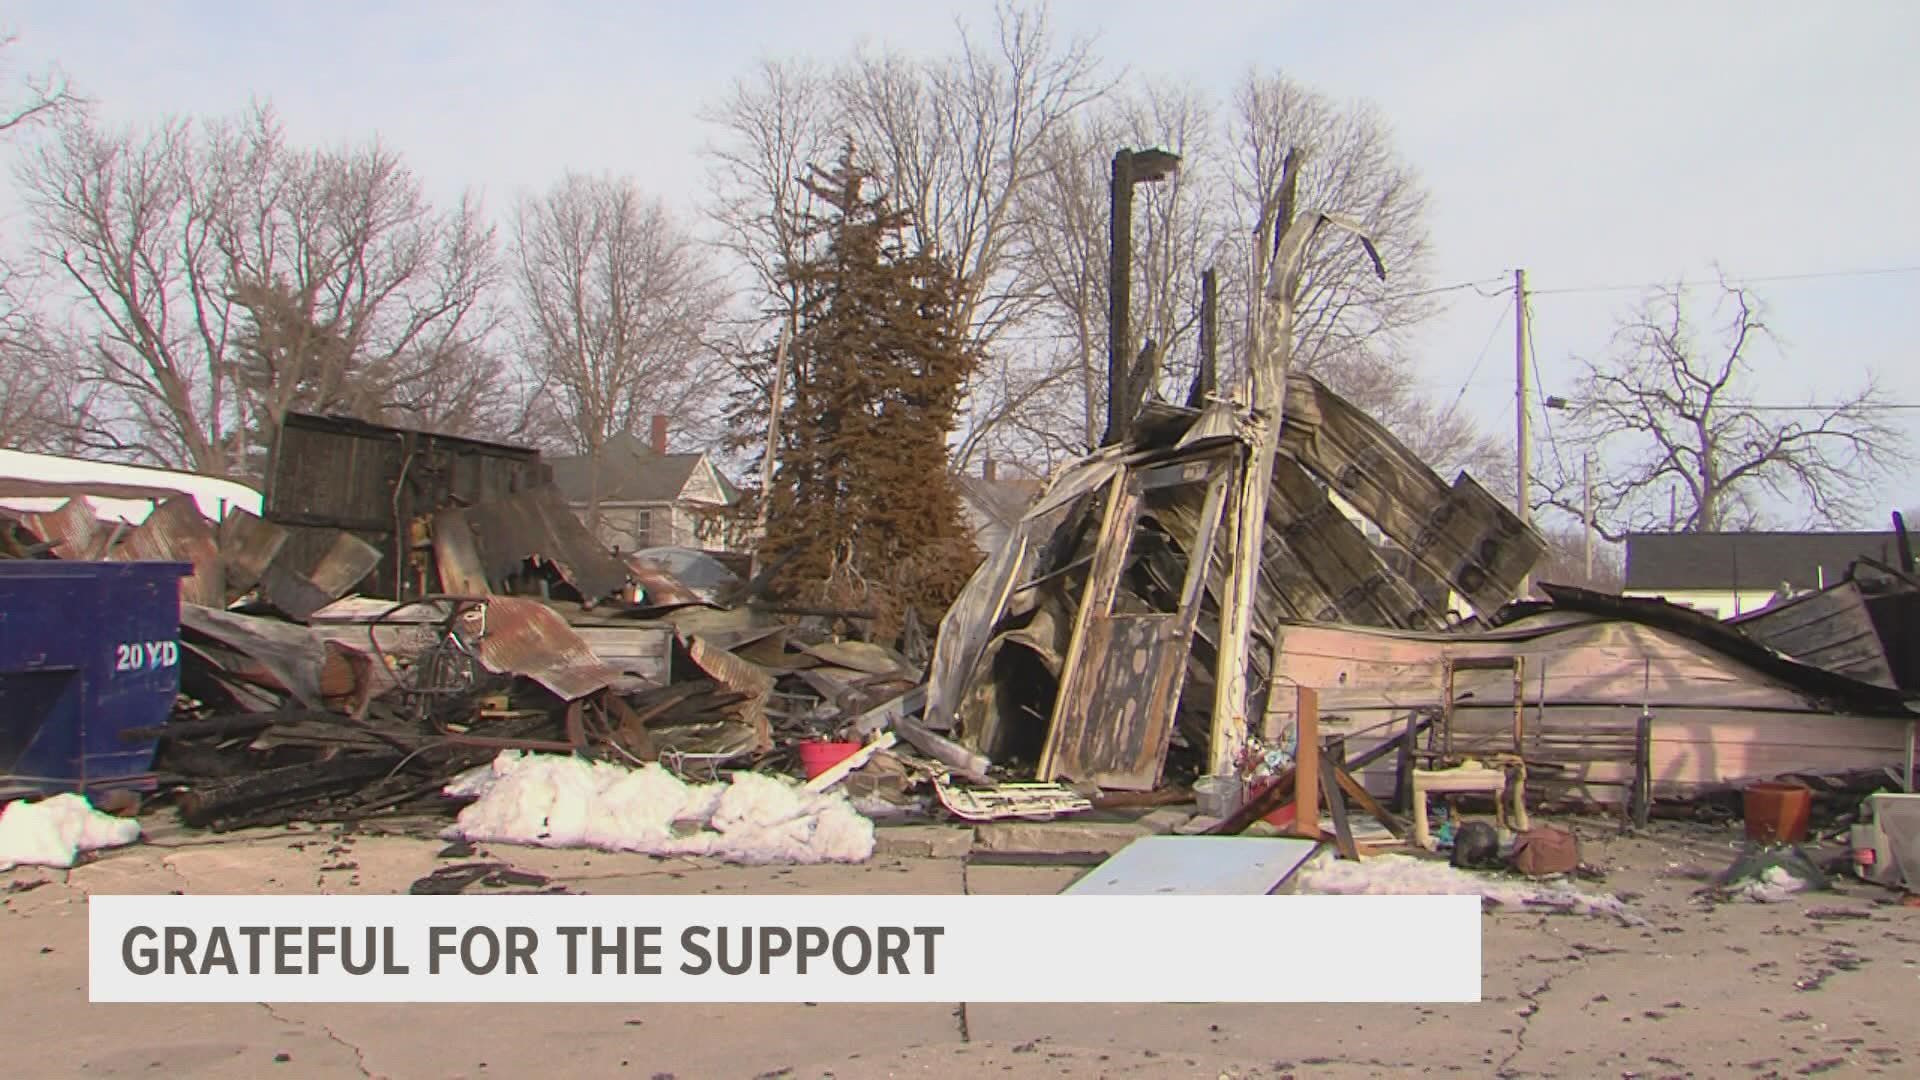 A fire destroyed Sharon McCammant's home, business and all her belongings. Now, the whole town is stepping in to help.